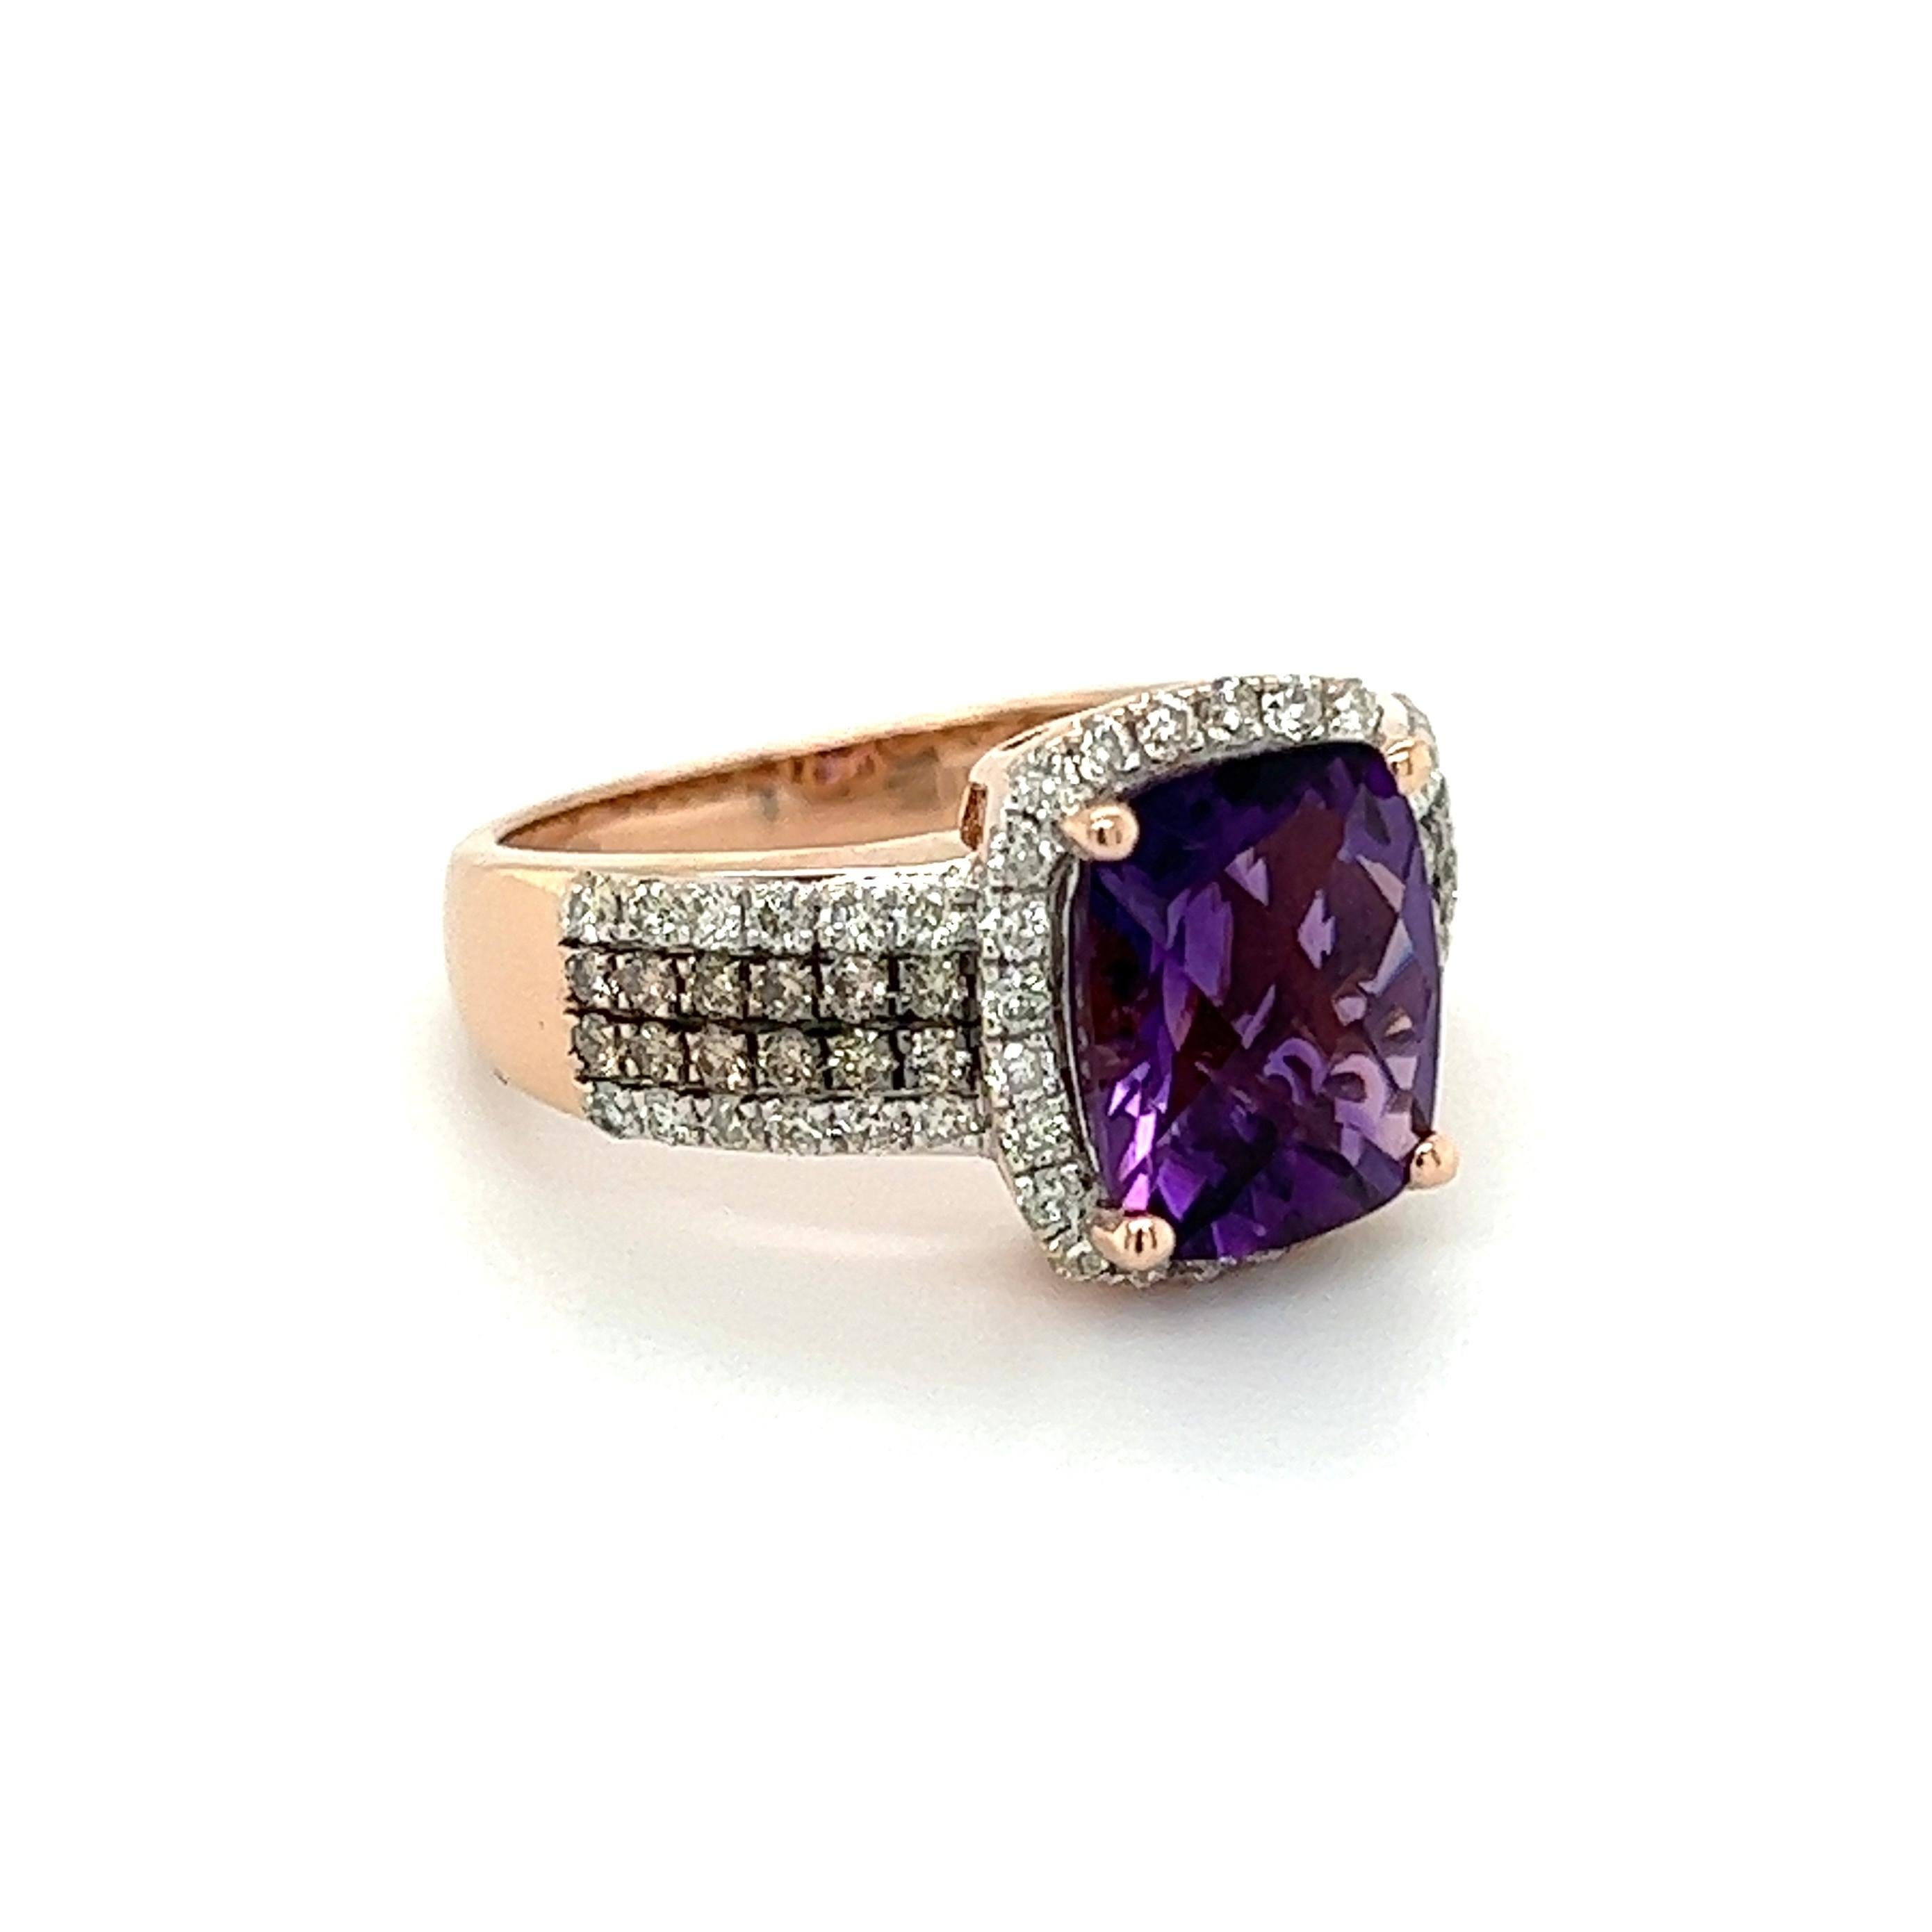 Simply Beautiful! Finely detailed Amethyst and Diamond Gold Cocktail Ring. Centering a securely nestled Hand set 2.5 Carat Checkerboard Amethyst. Surrounded by and enhancing the sides Champagne and White Diamonds, weighing approx. 0.72tcw. Hand